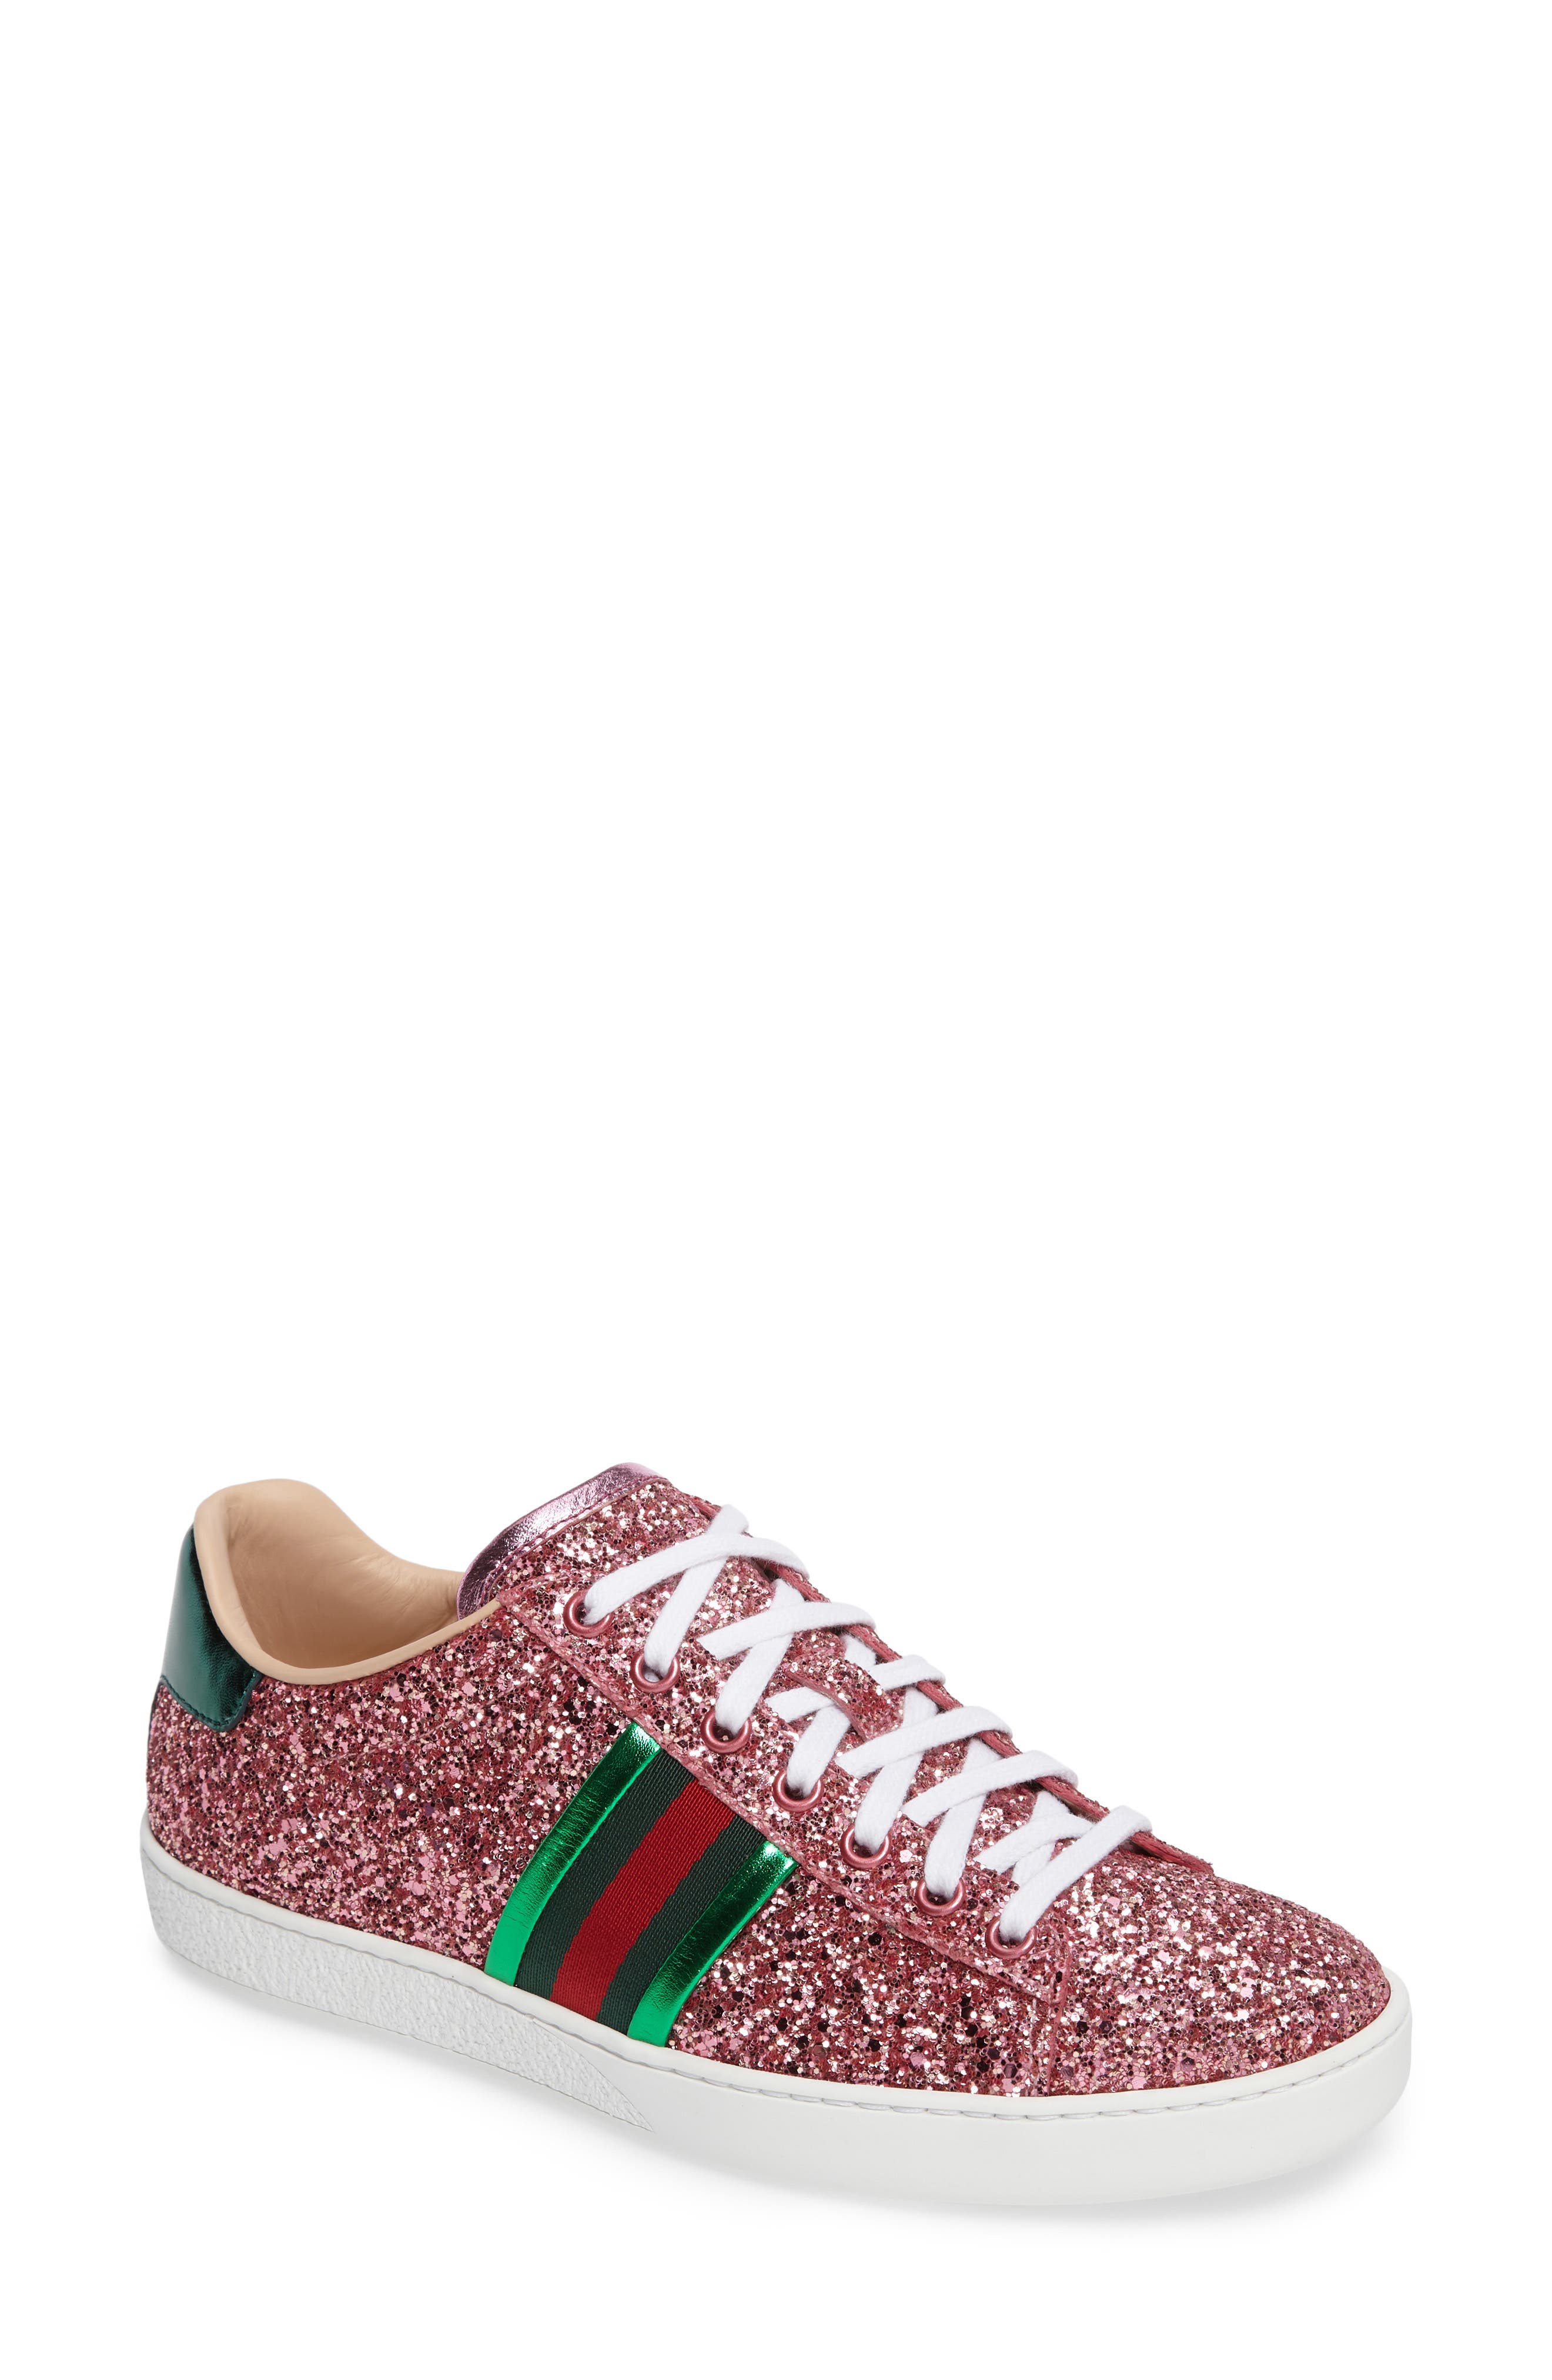 gucci new ace glitter sneakers